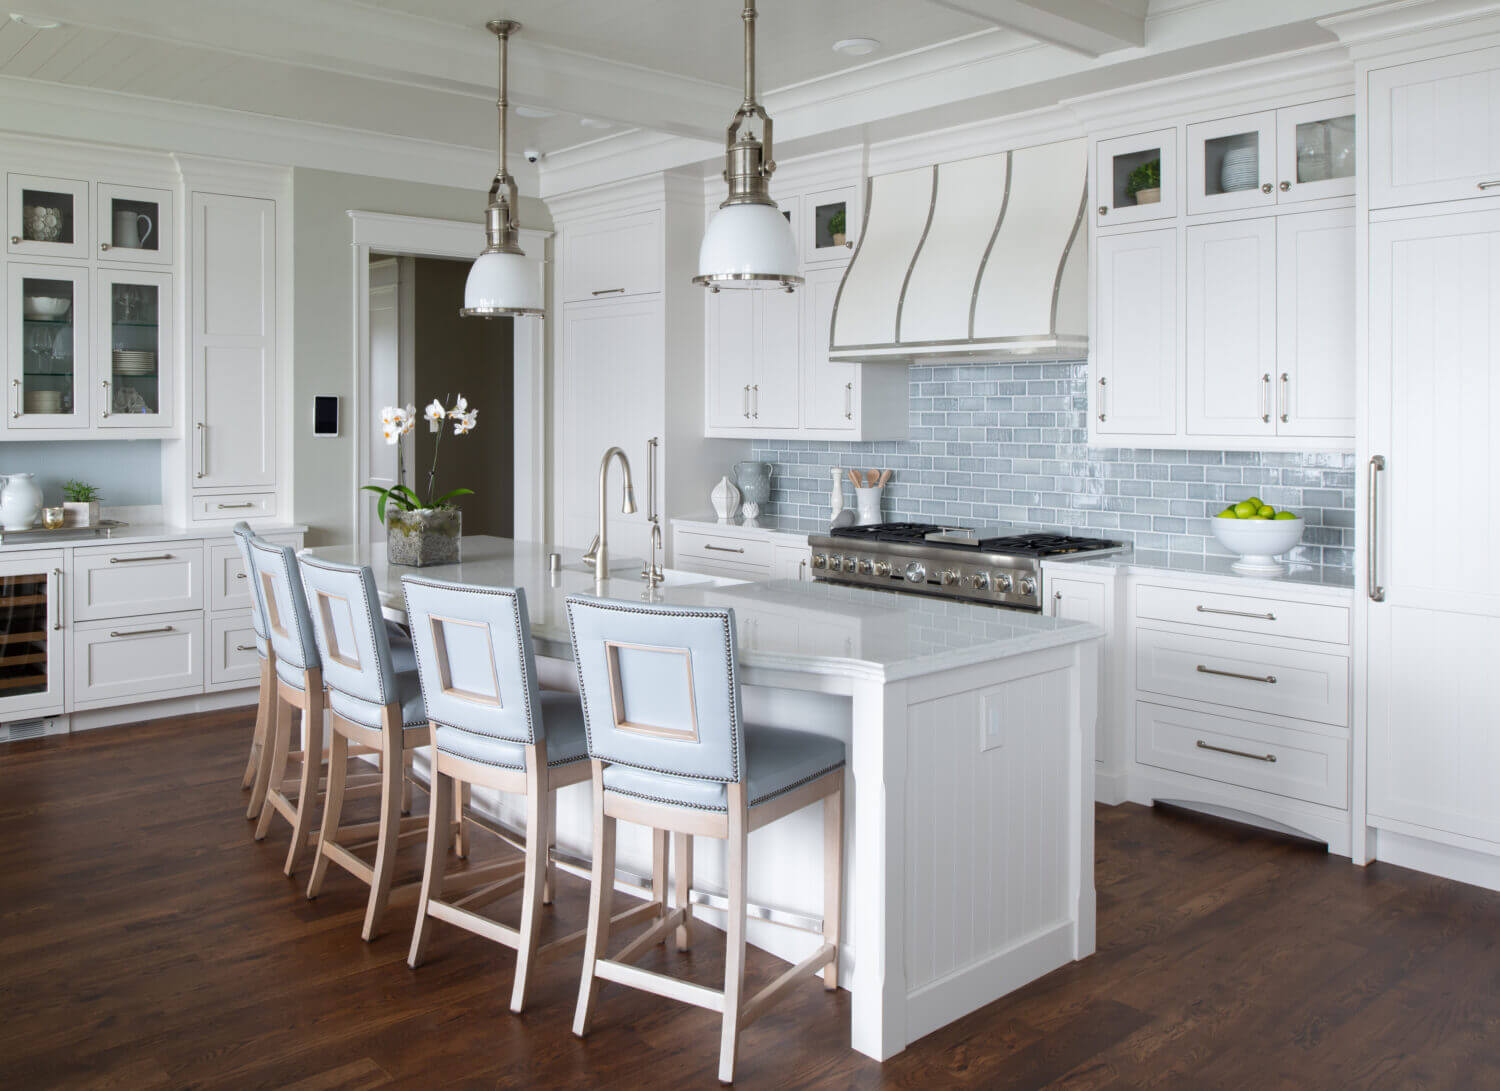 An East coast shingle styled kitchen with a symmetrical design using white painted inset cabinets and shiplap details.